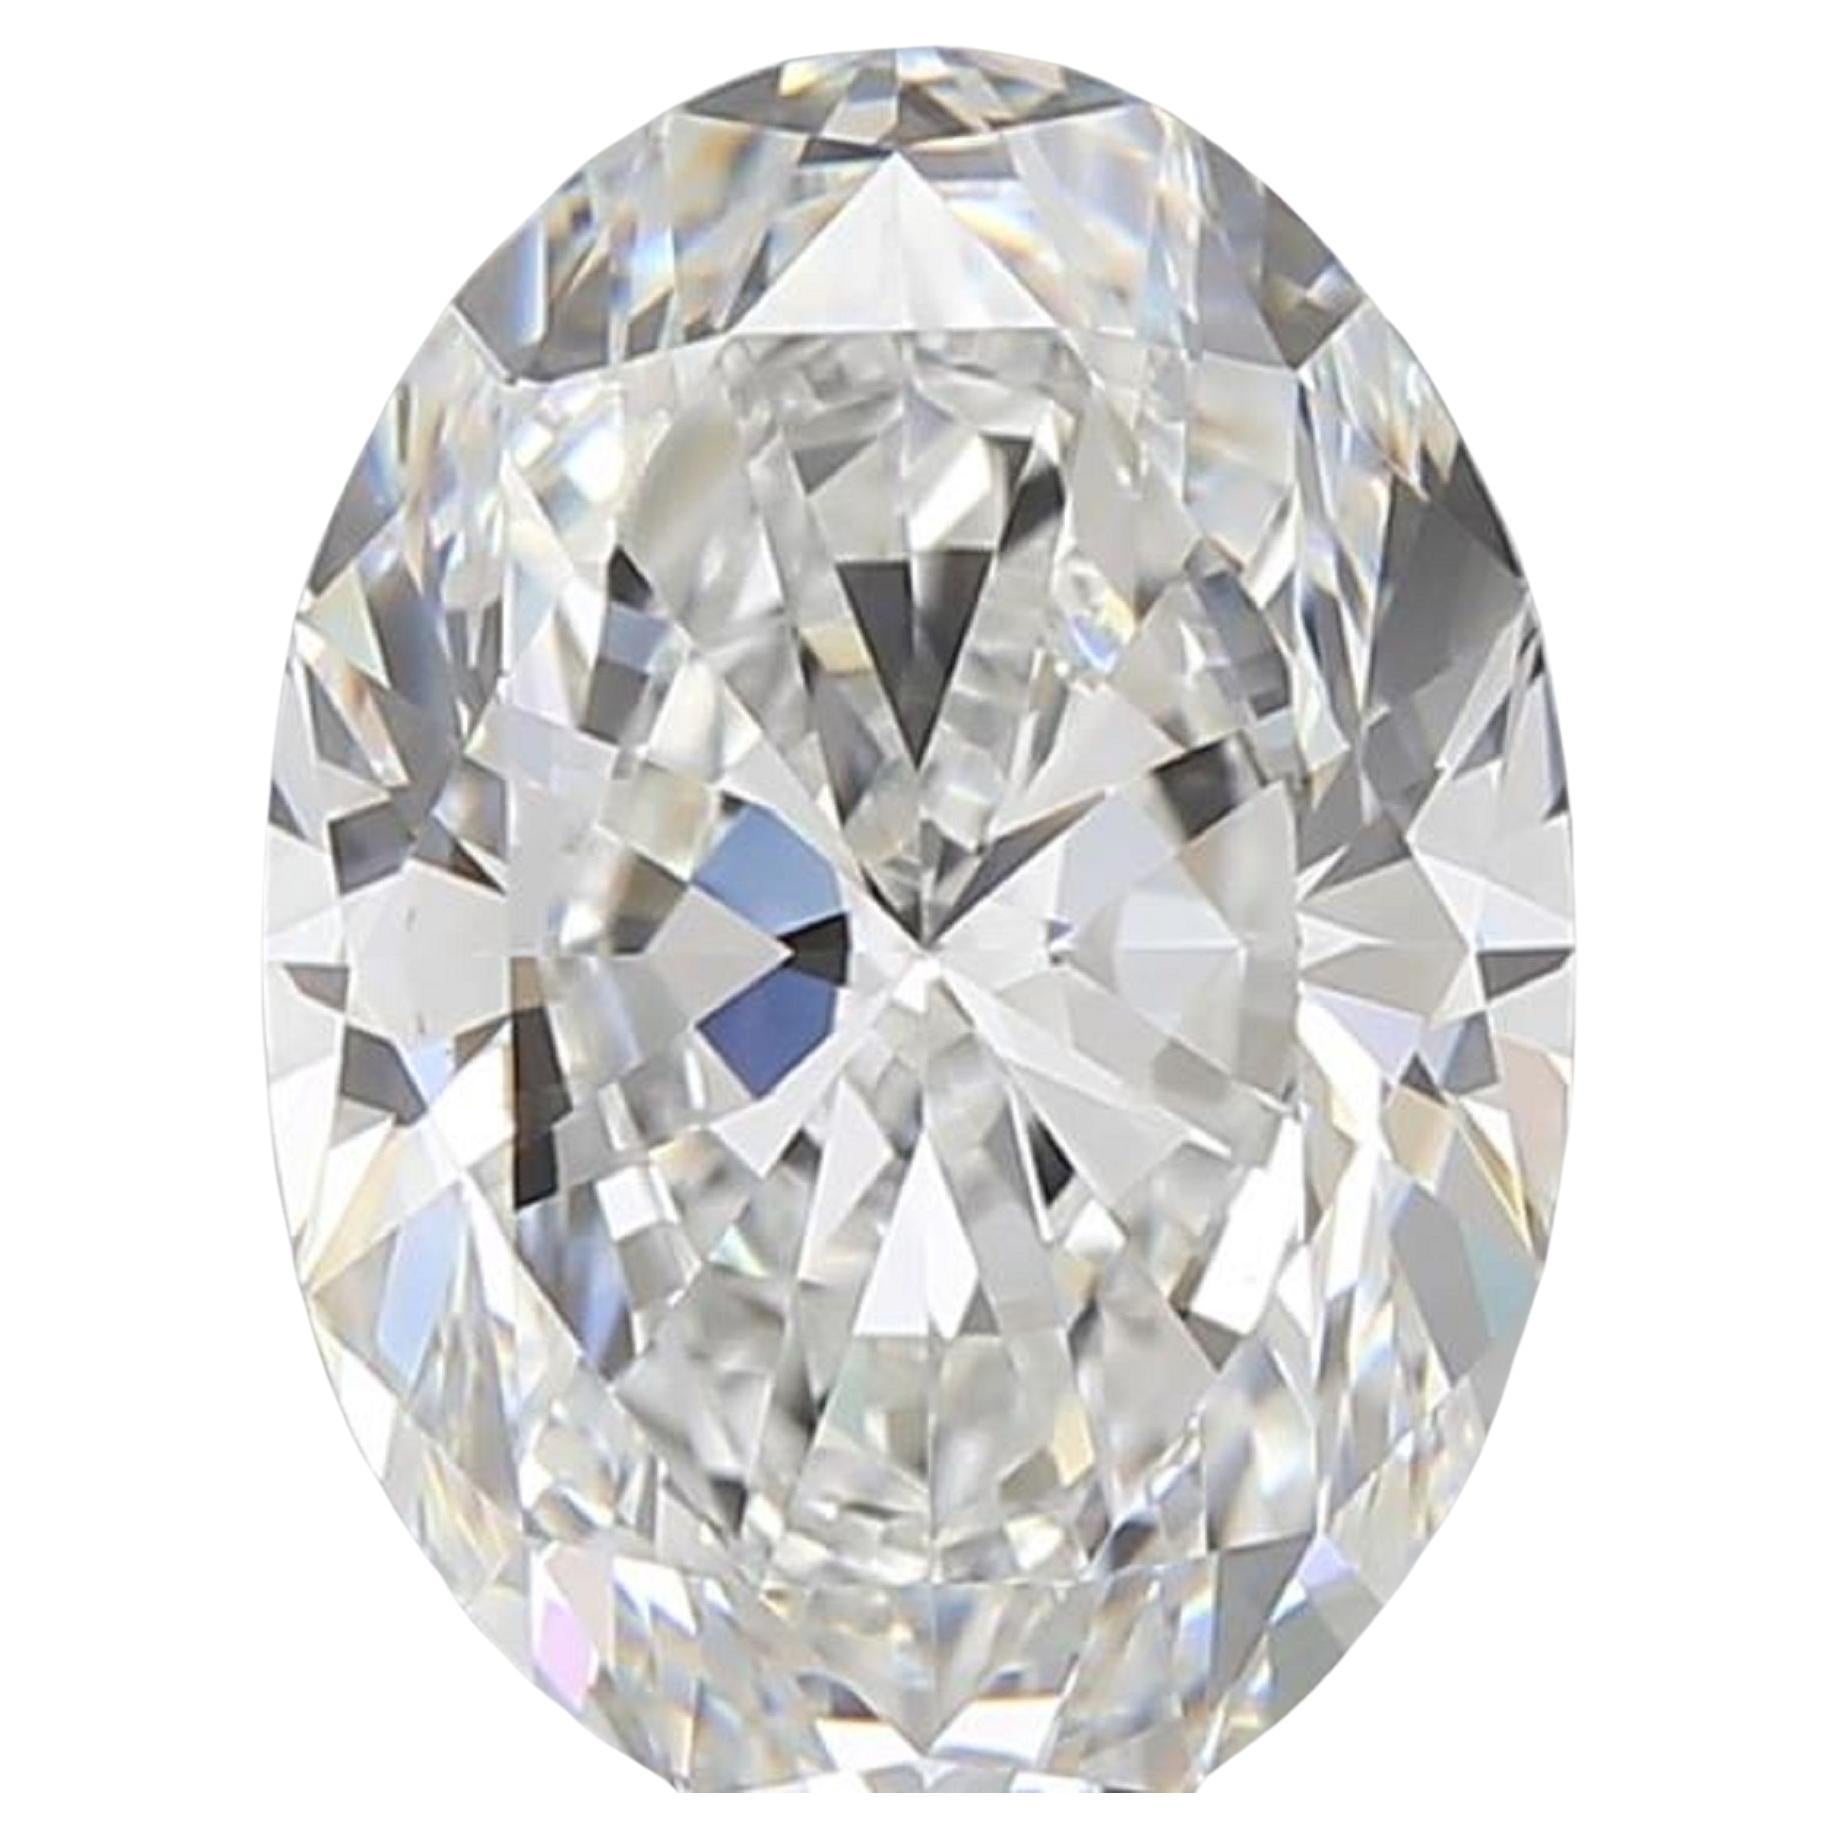 An exquisite GIA Certified 4 Carat Oval Diamond
Excellent Symmetry, Excellent Polish
None Fluorescence  
No bow tie!


